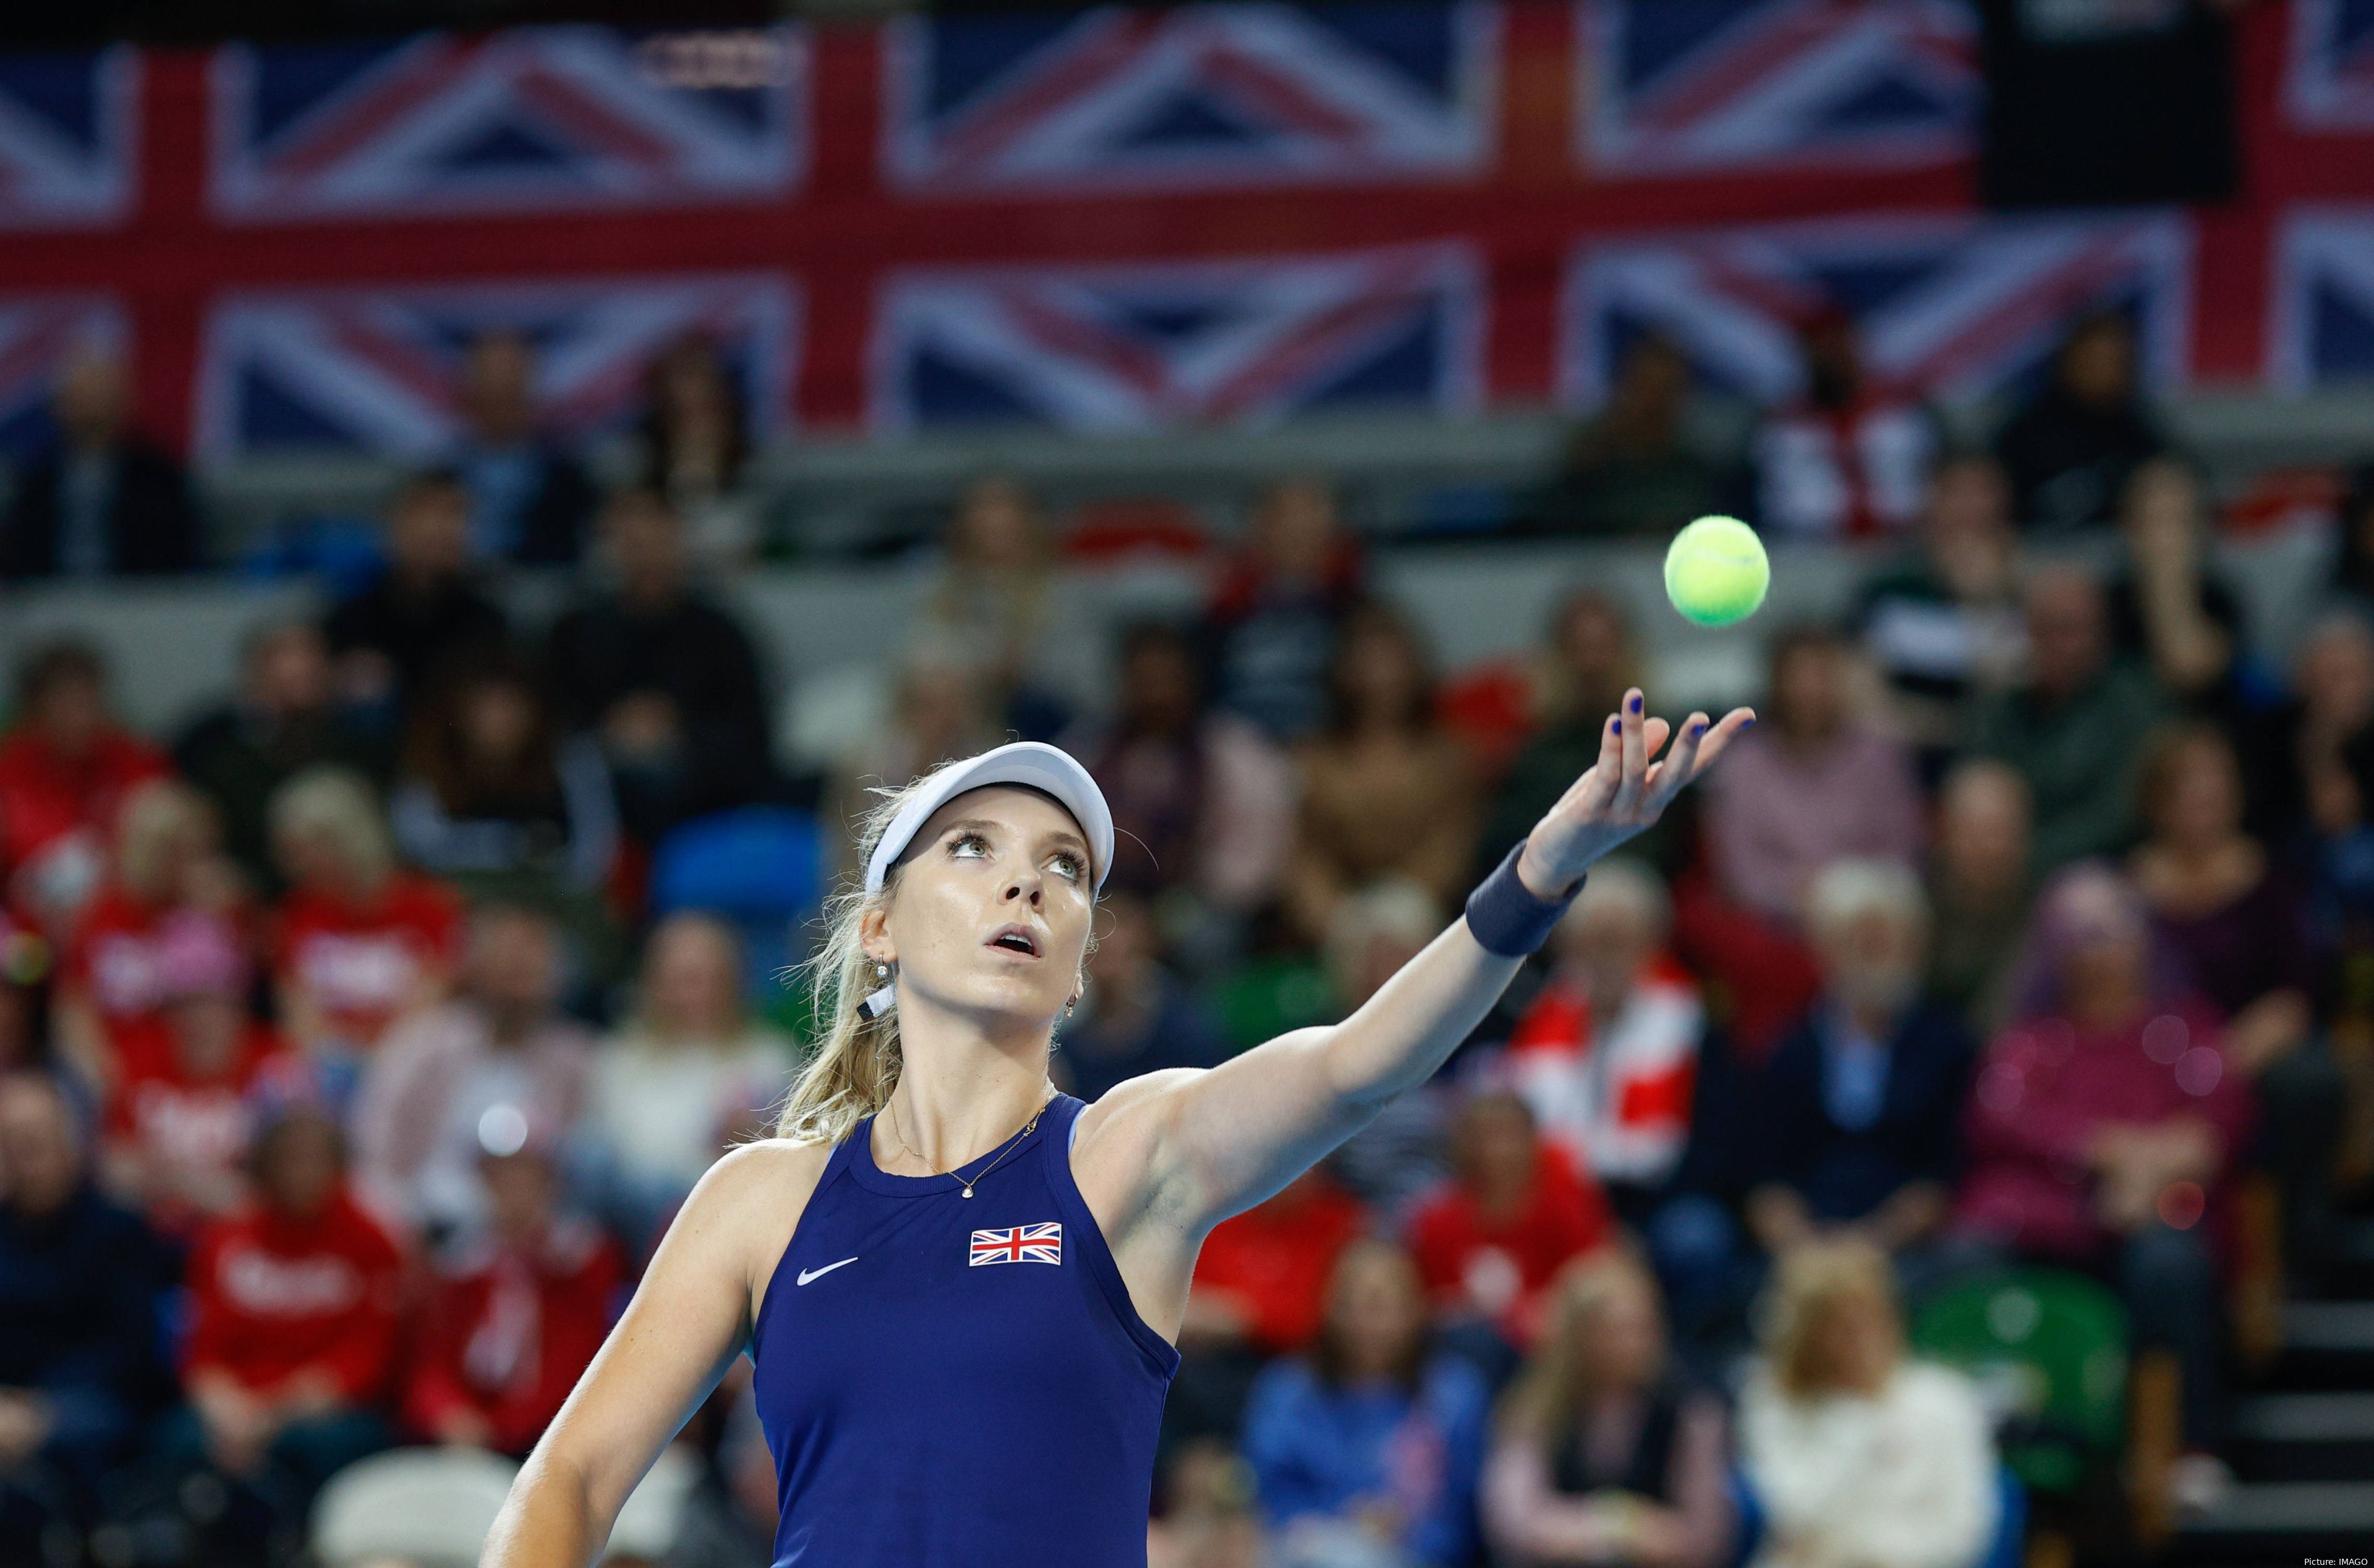 Katie Boulter (pictured) hails from closeby in Leicester and will begin her title defence against Harriet Dart.